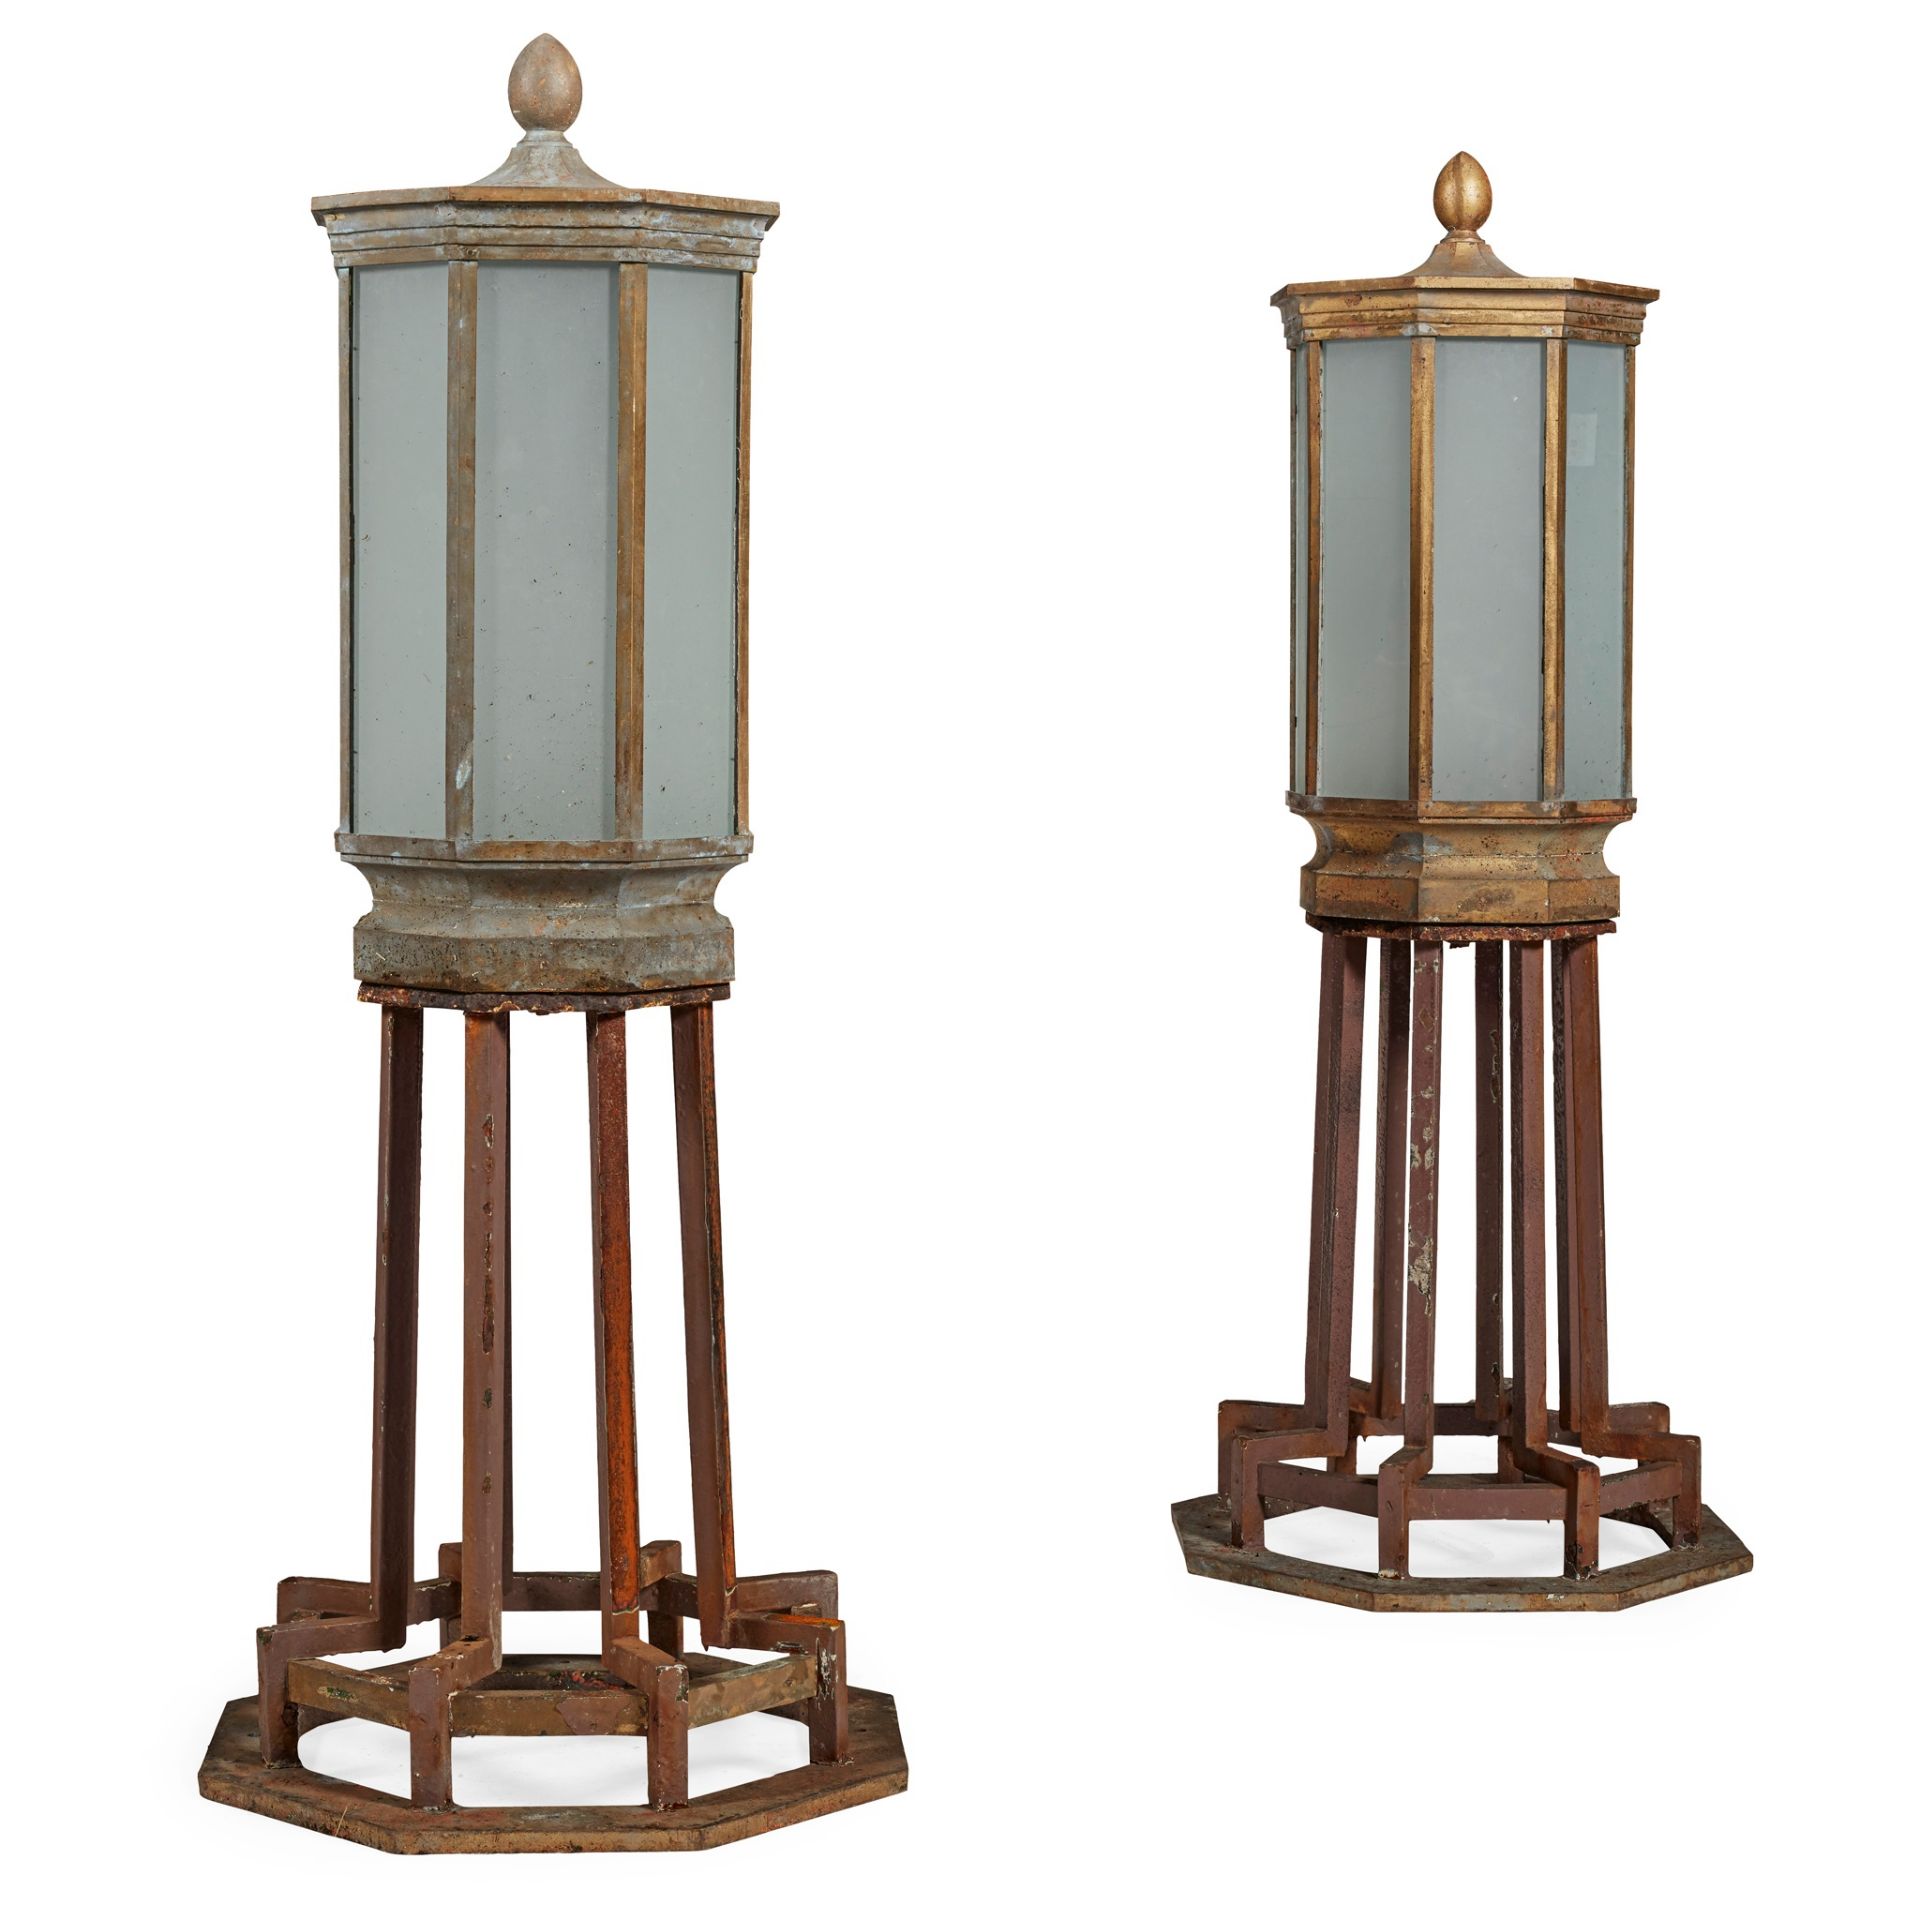 PAIR OF LARGE OCTAGONAL BRONZE AND GLASS GATE POST LANTERNS LATE 19TH CENTURY